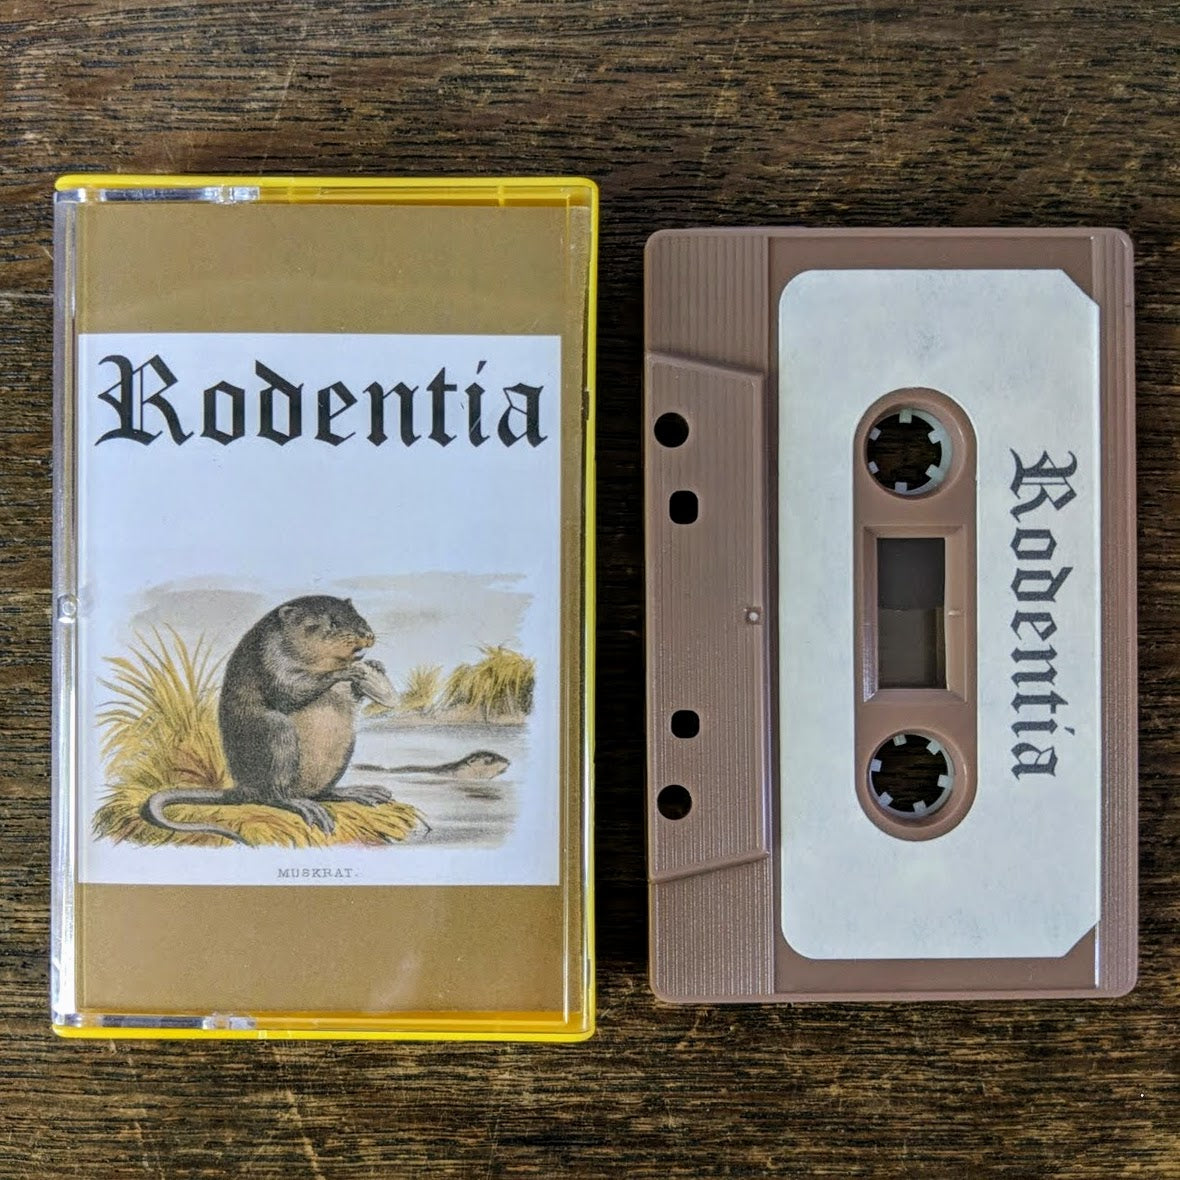 [SOLD OUT] RODENTIA "Black Swampy Water" Cassette Tape